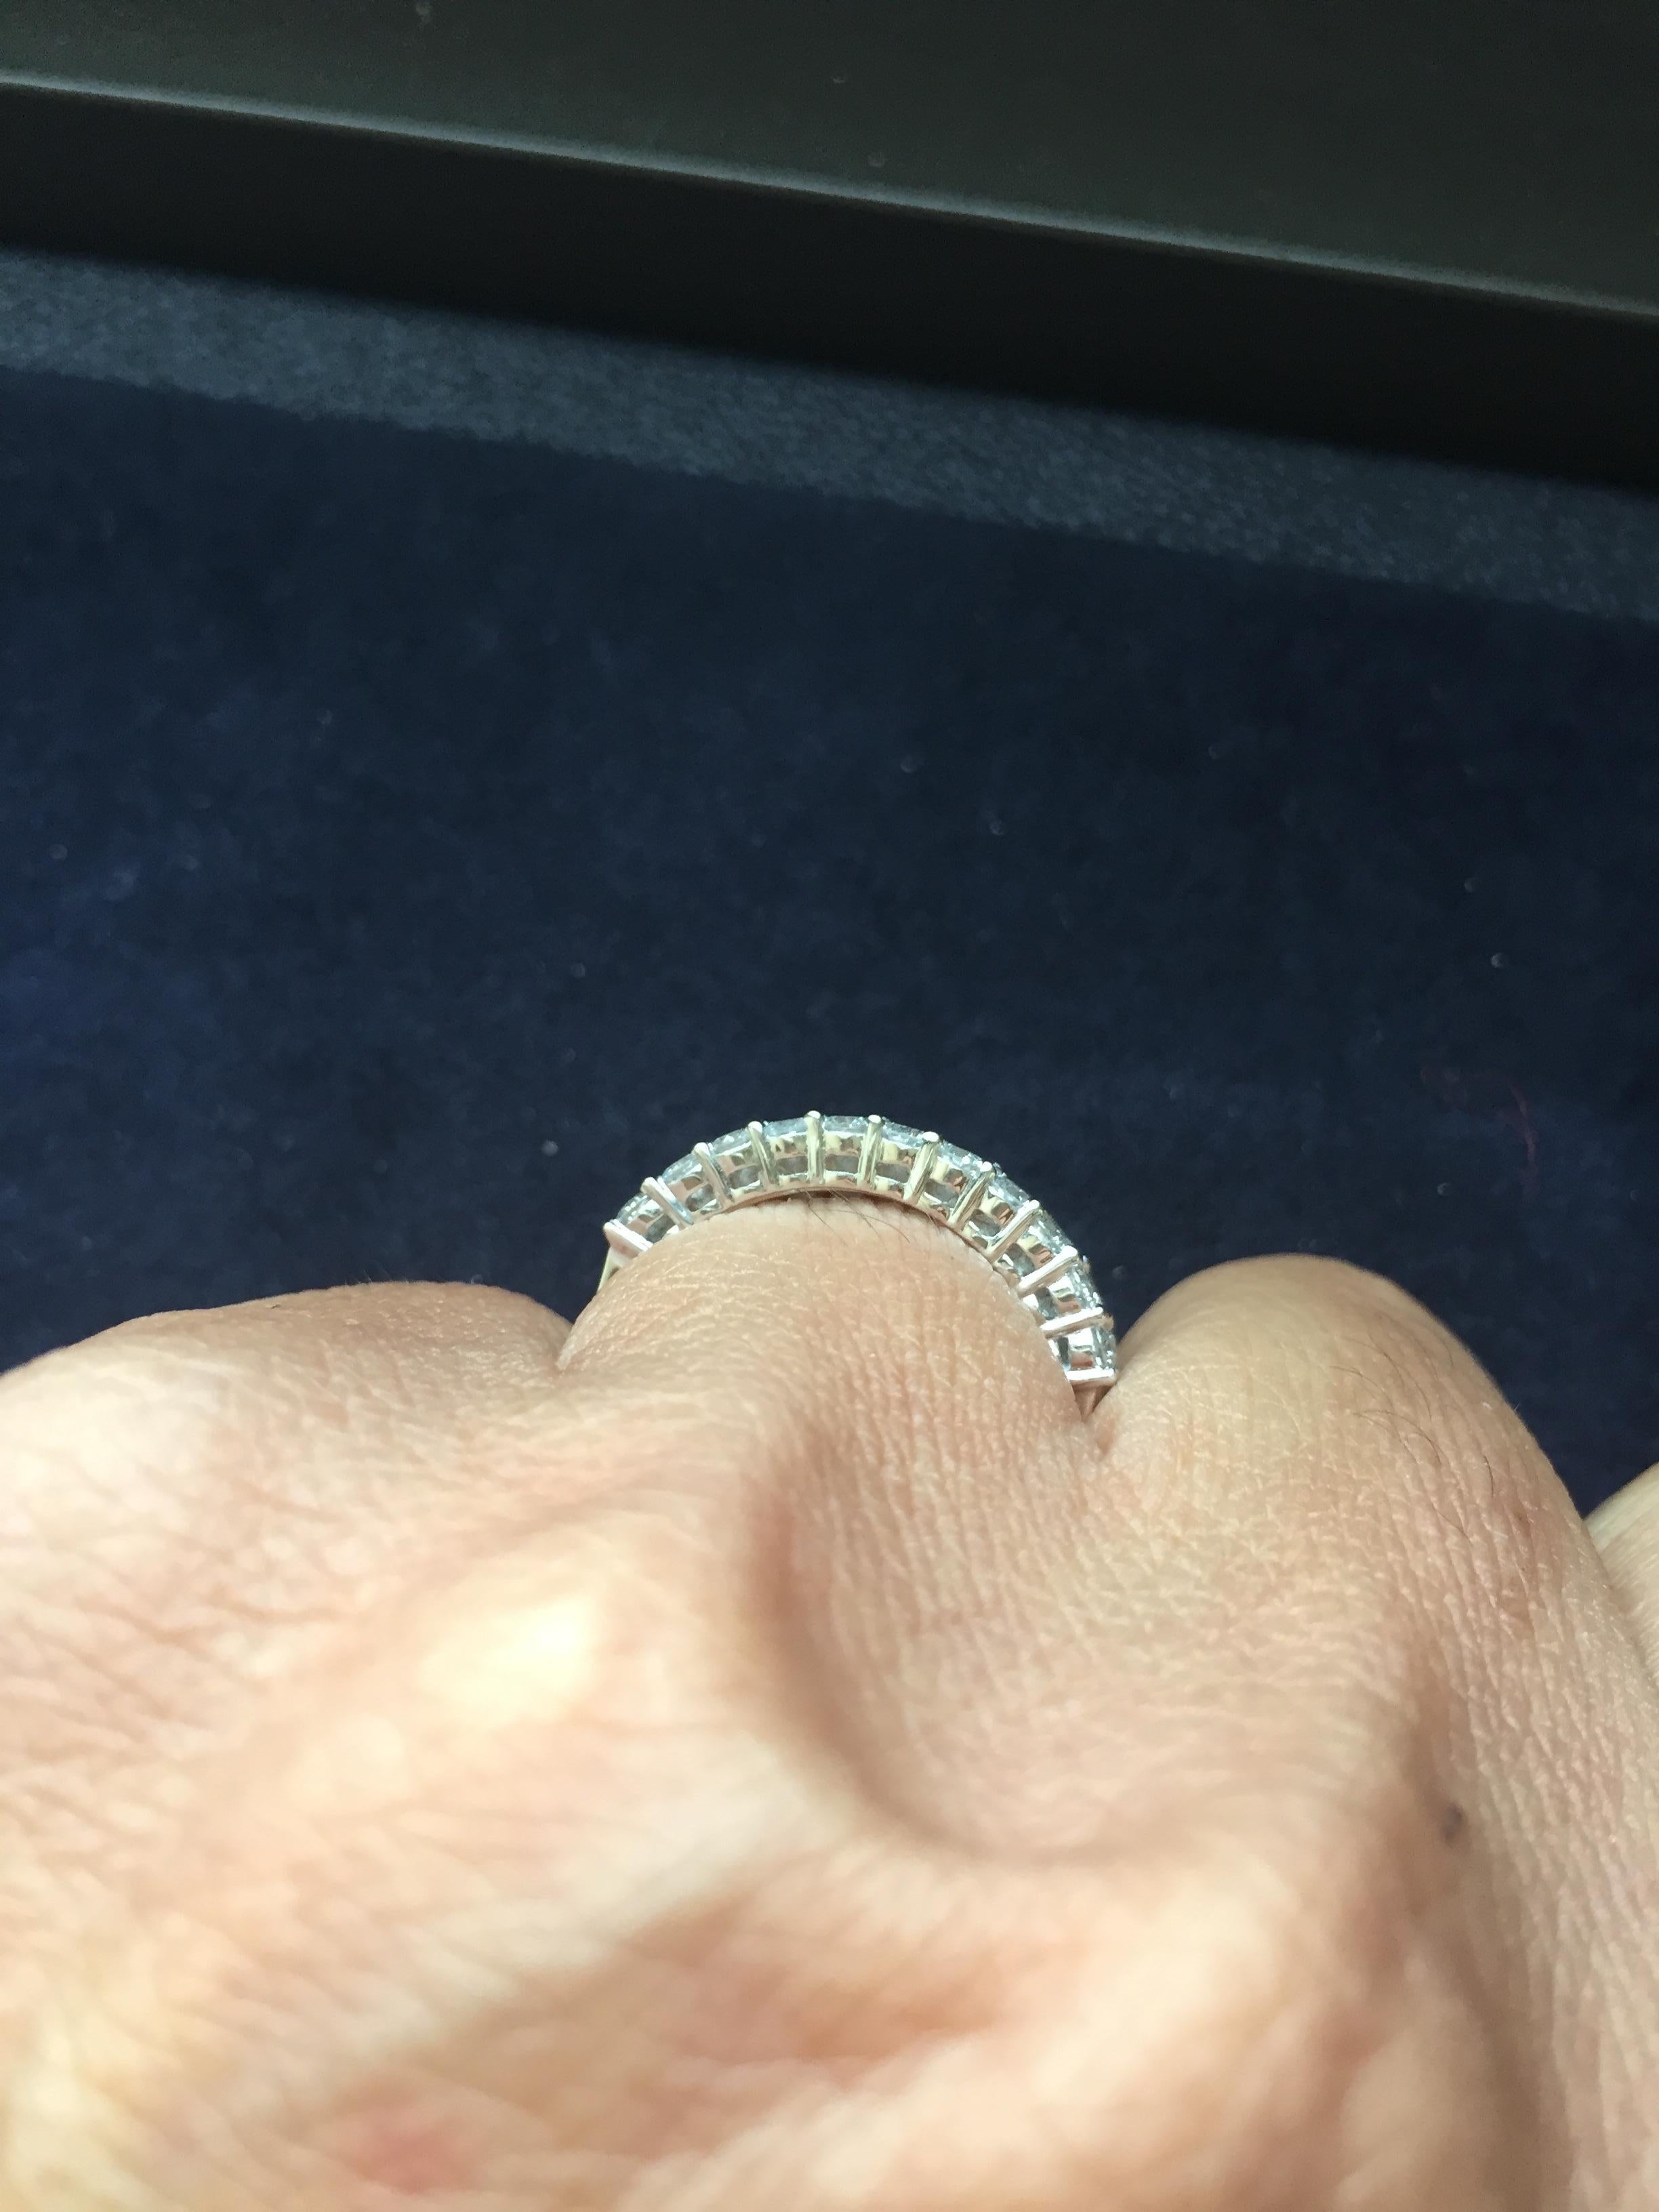 Half-way diamond band made with baguette and round stones. This beautiful band can be worn alone or with an engagement ring. 18k White Gold, Carat wt. 1.29, Color F, Clarity VS.